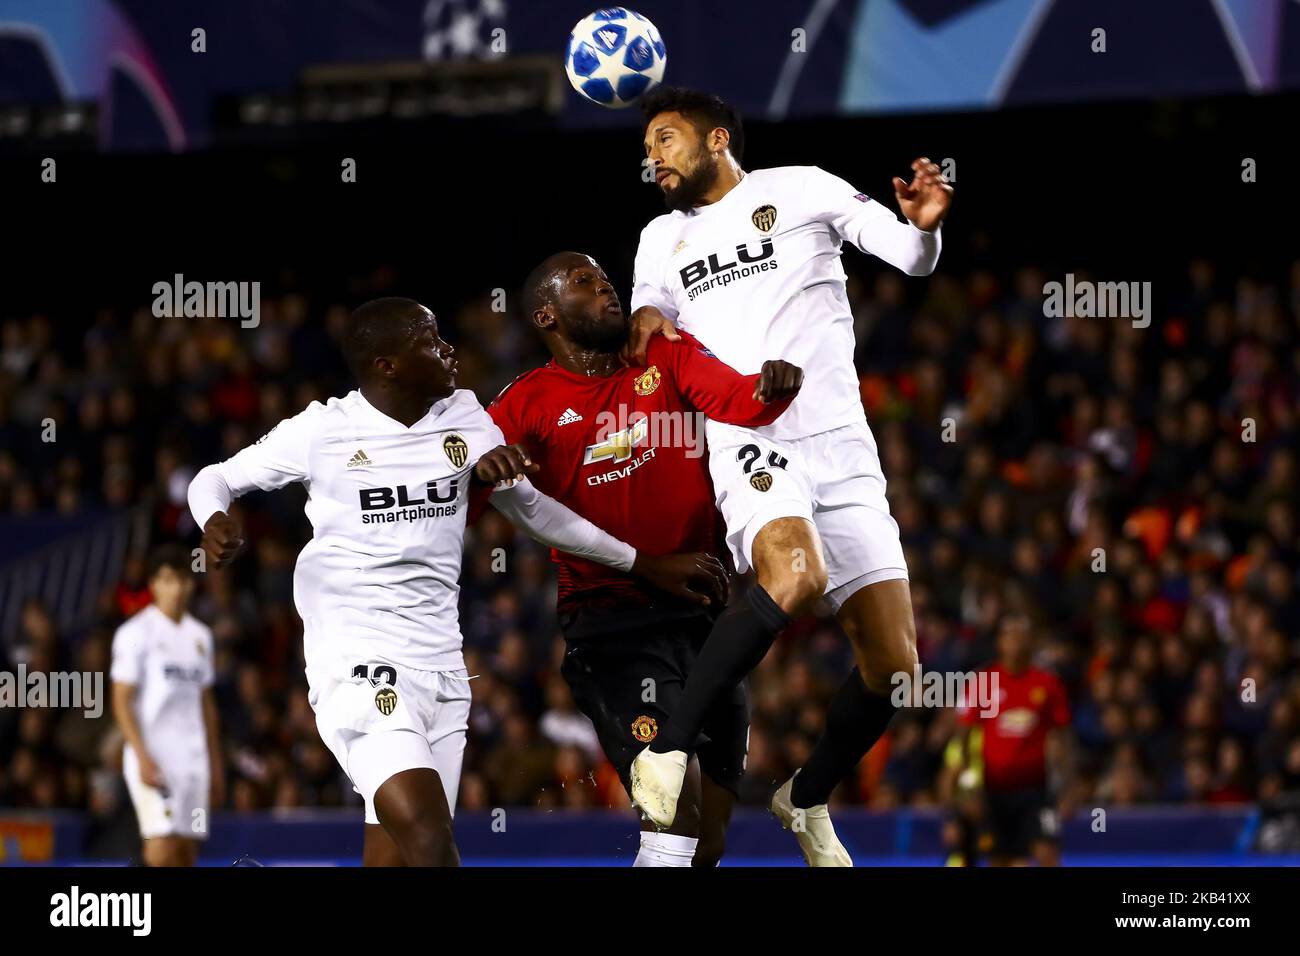 Mouctar Diakhaby of Valencia CF (L) Romelu Lukaku of Manchester United (C) and Ezequiel Garay of Valencia CF (R) during UEFA Champions League Group H between Valencia CF and Manchester United at Mestalla stadium on December 12, 2018. (Photo by Jose Miguel Fernandez/NurPhoto) (Photo by Jose Miguel Fernandez/NurPhoto) Stock Photo